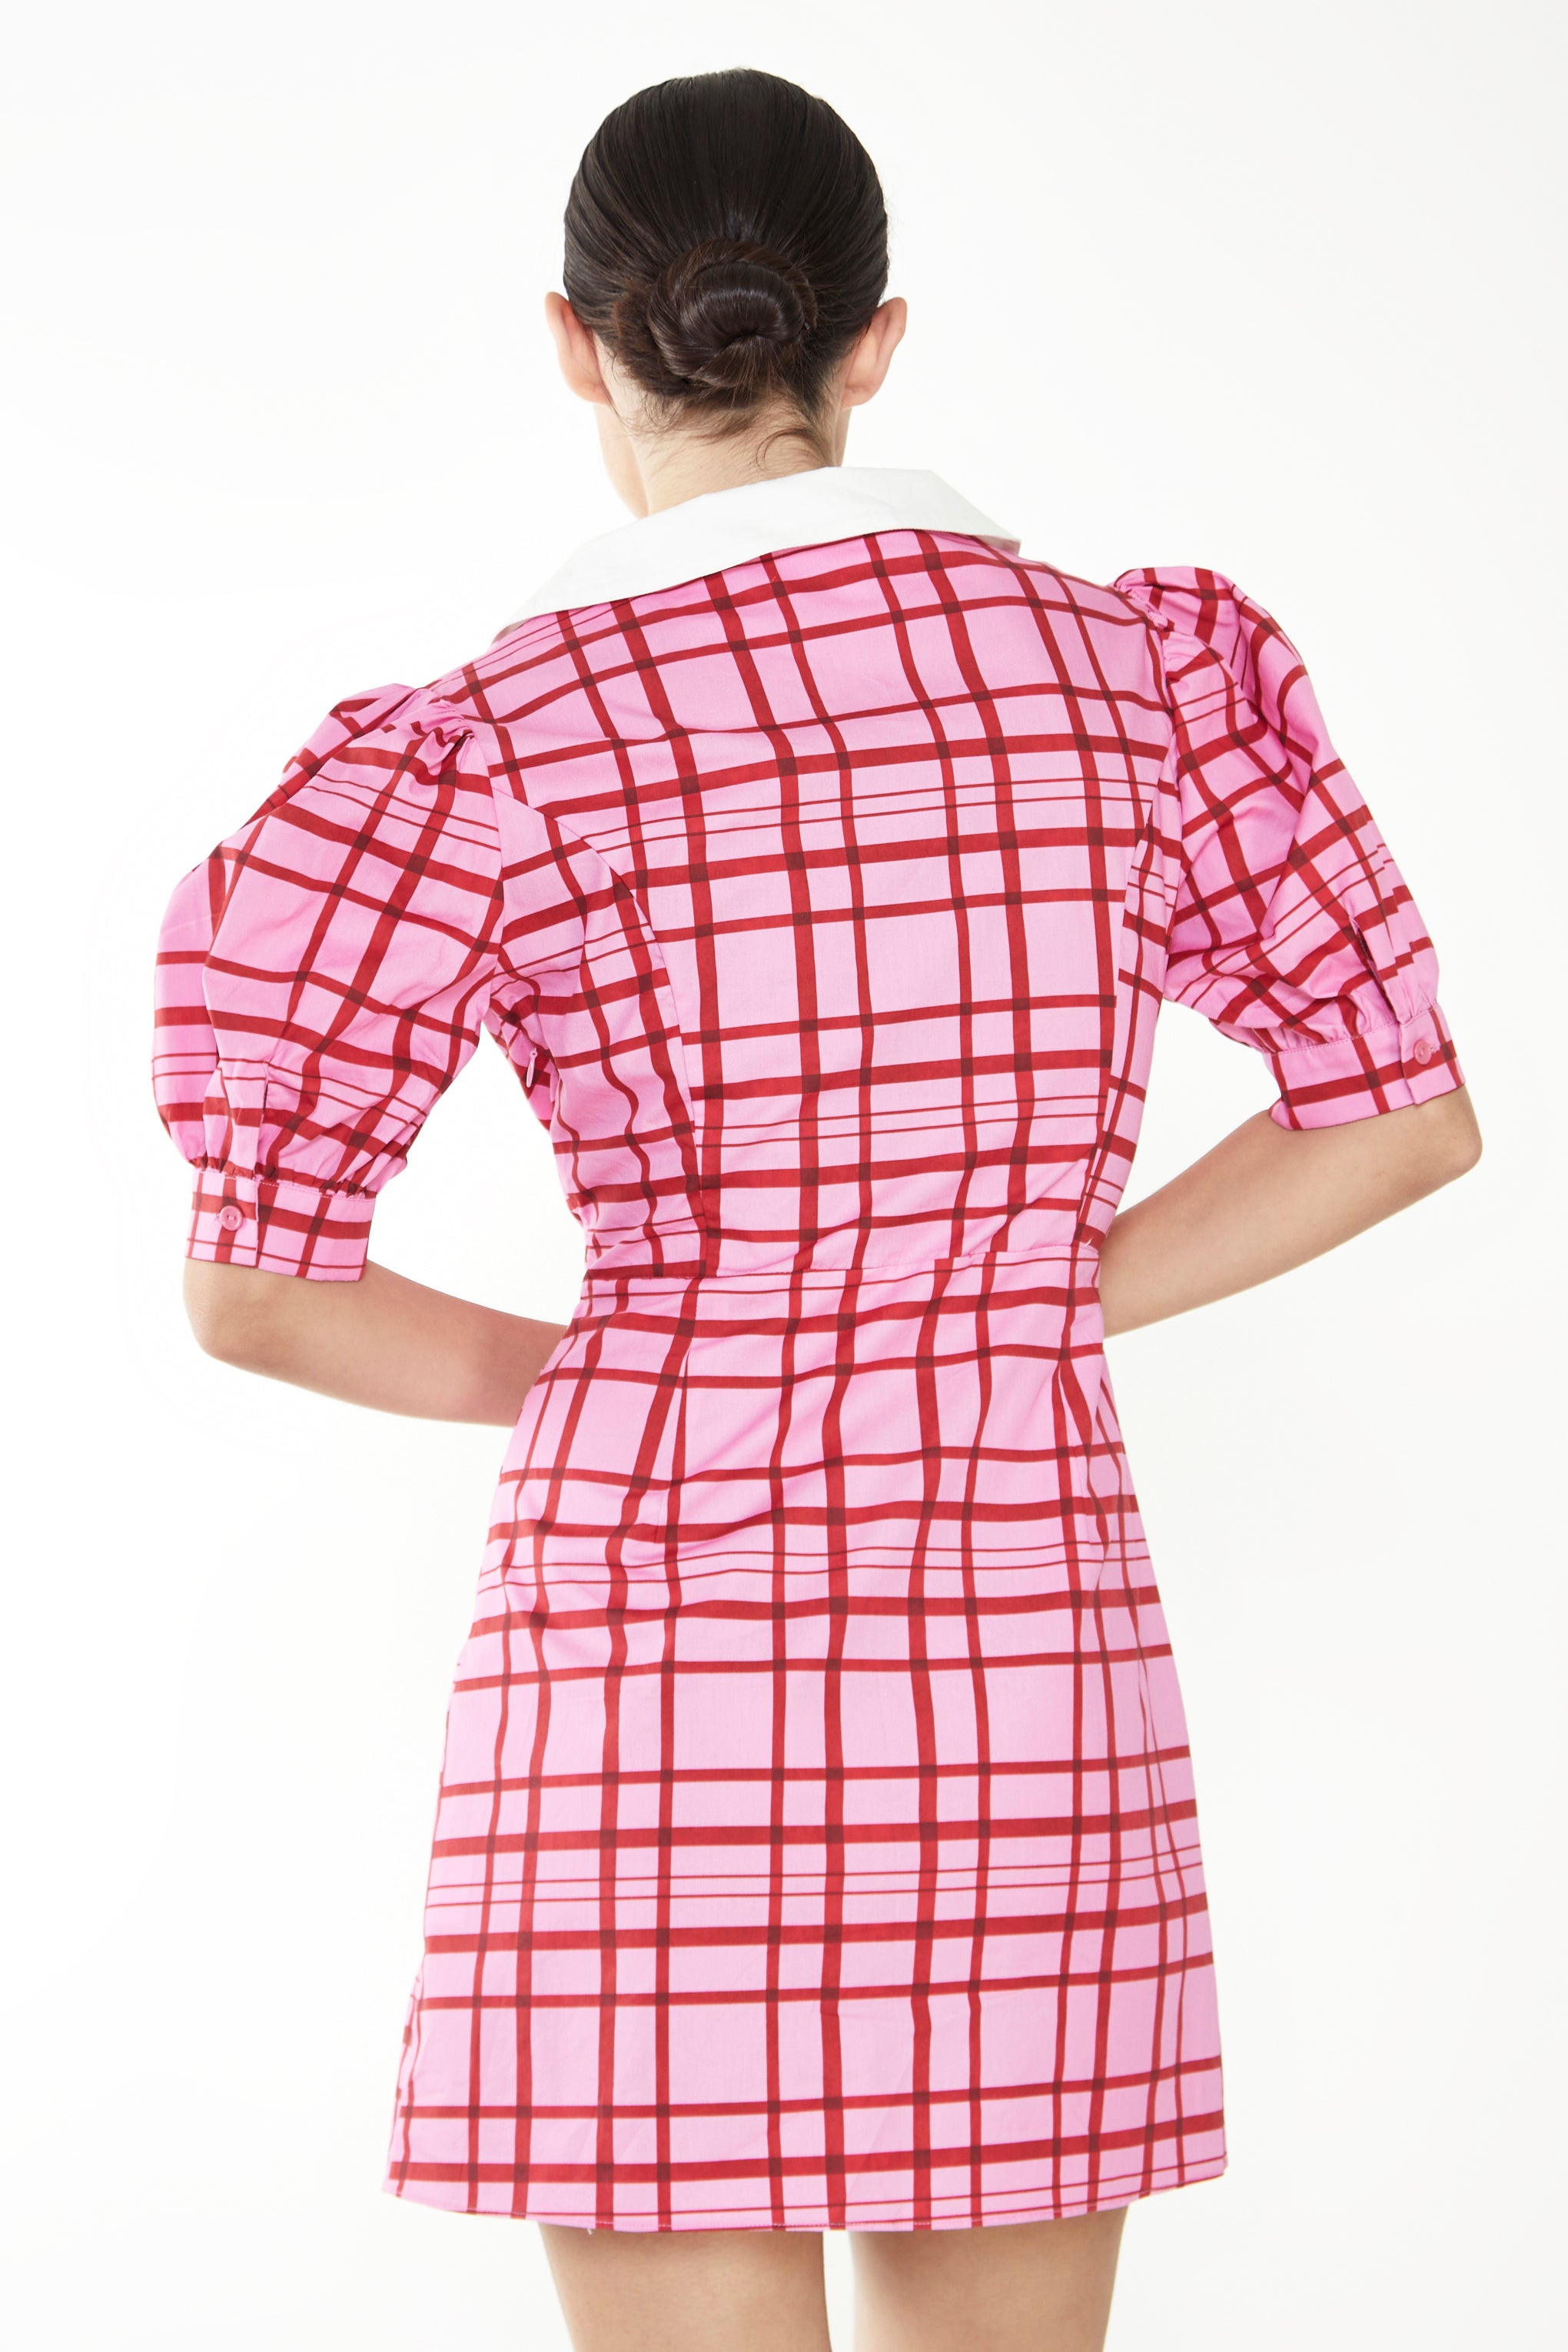 Glamorous Short Puff Sleeve Pink Red Grid Check Mini Dress with Collar Detail